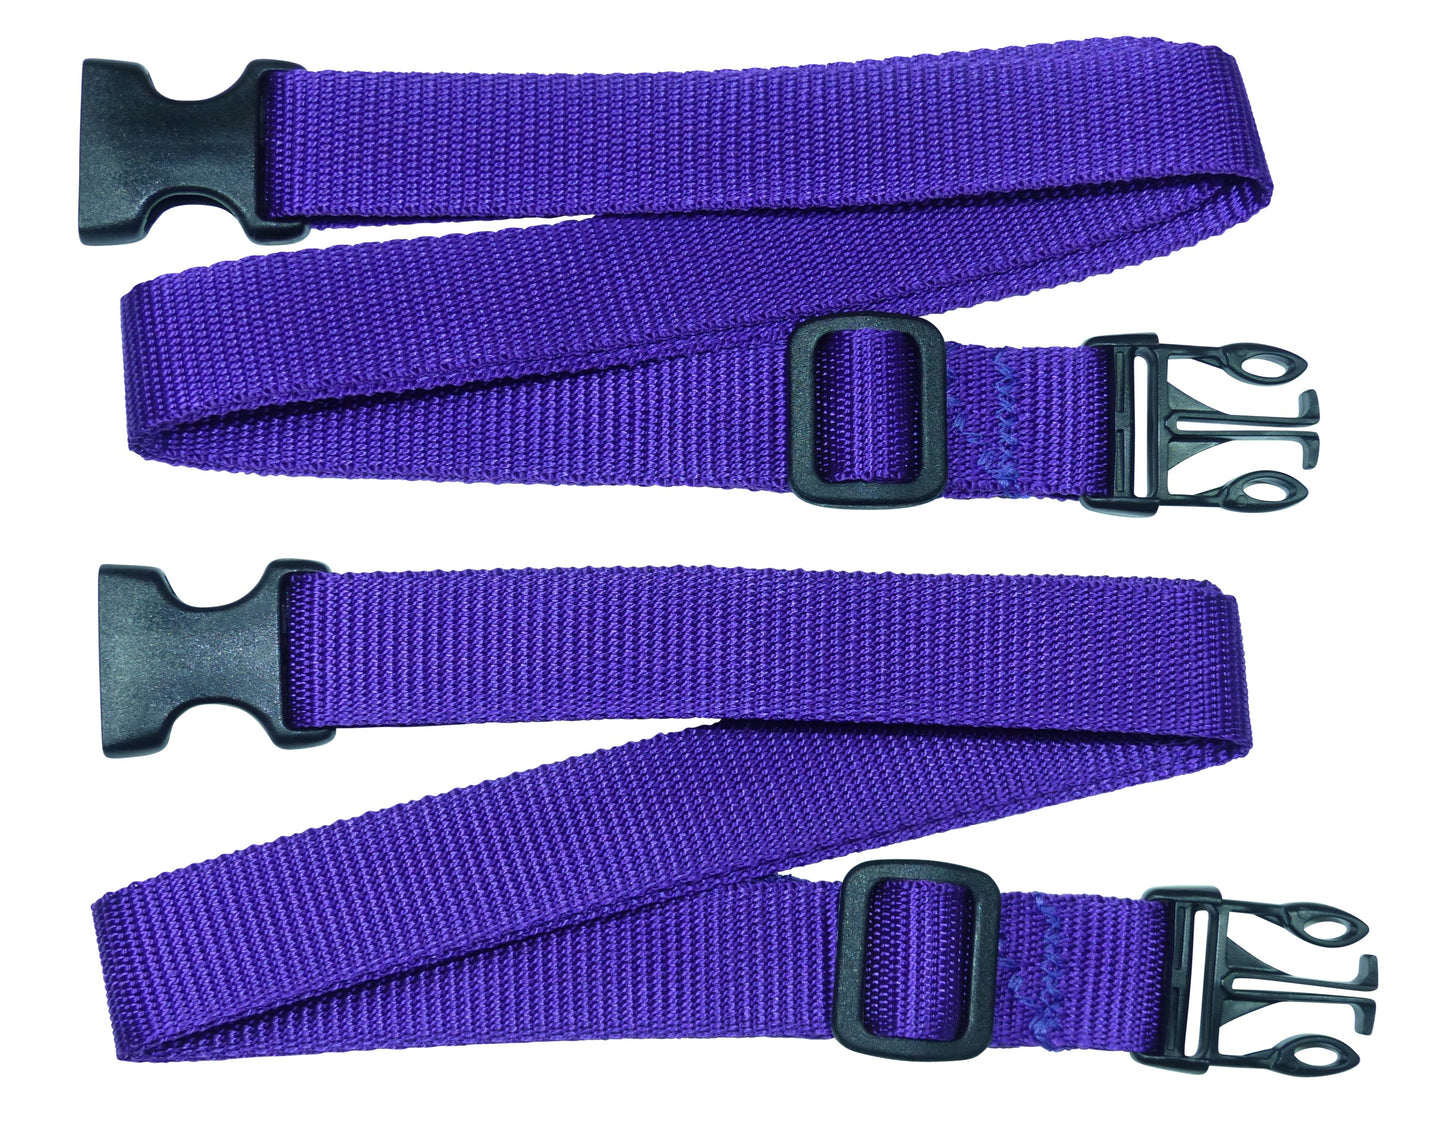 Benristraps 25mm Webbing Strap with Buckles for Luggage, Suitcases, Boxes (Pair)